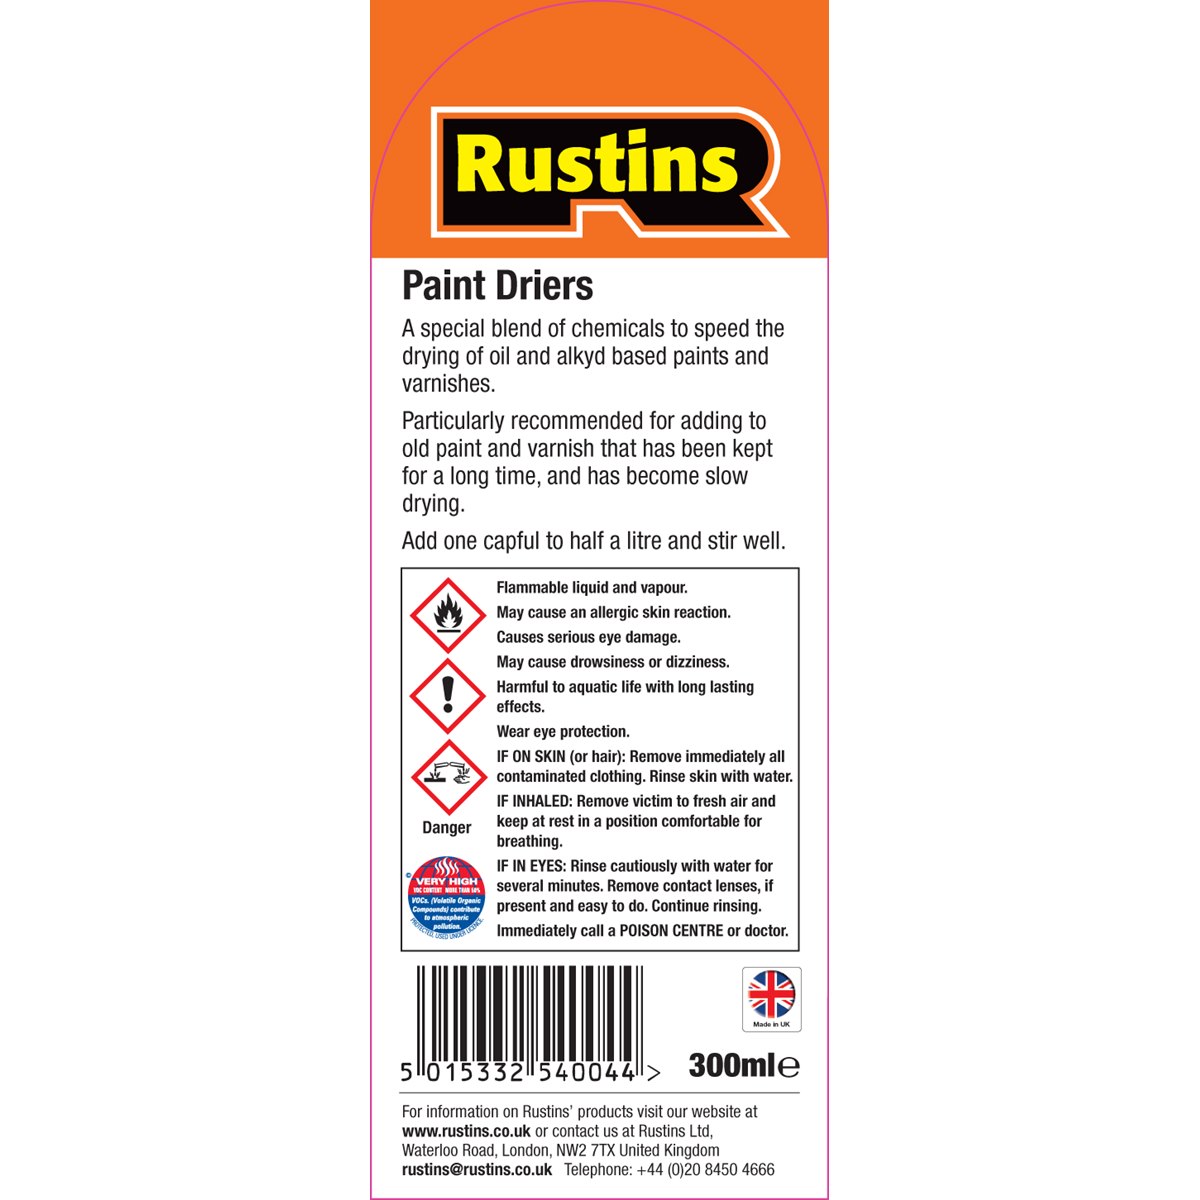 Where to Buy Rustins Paint Driers